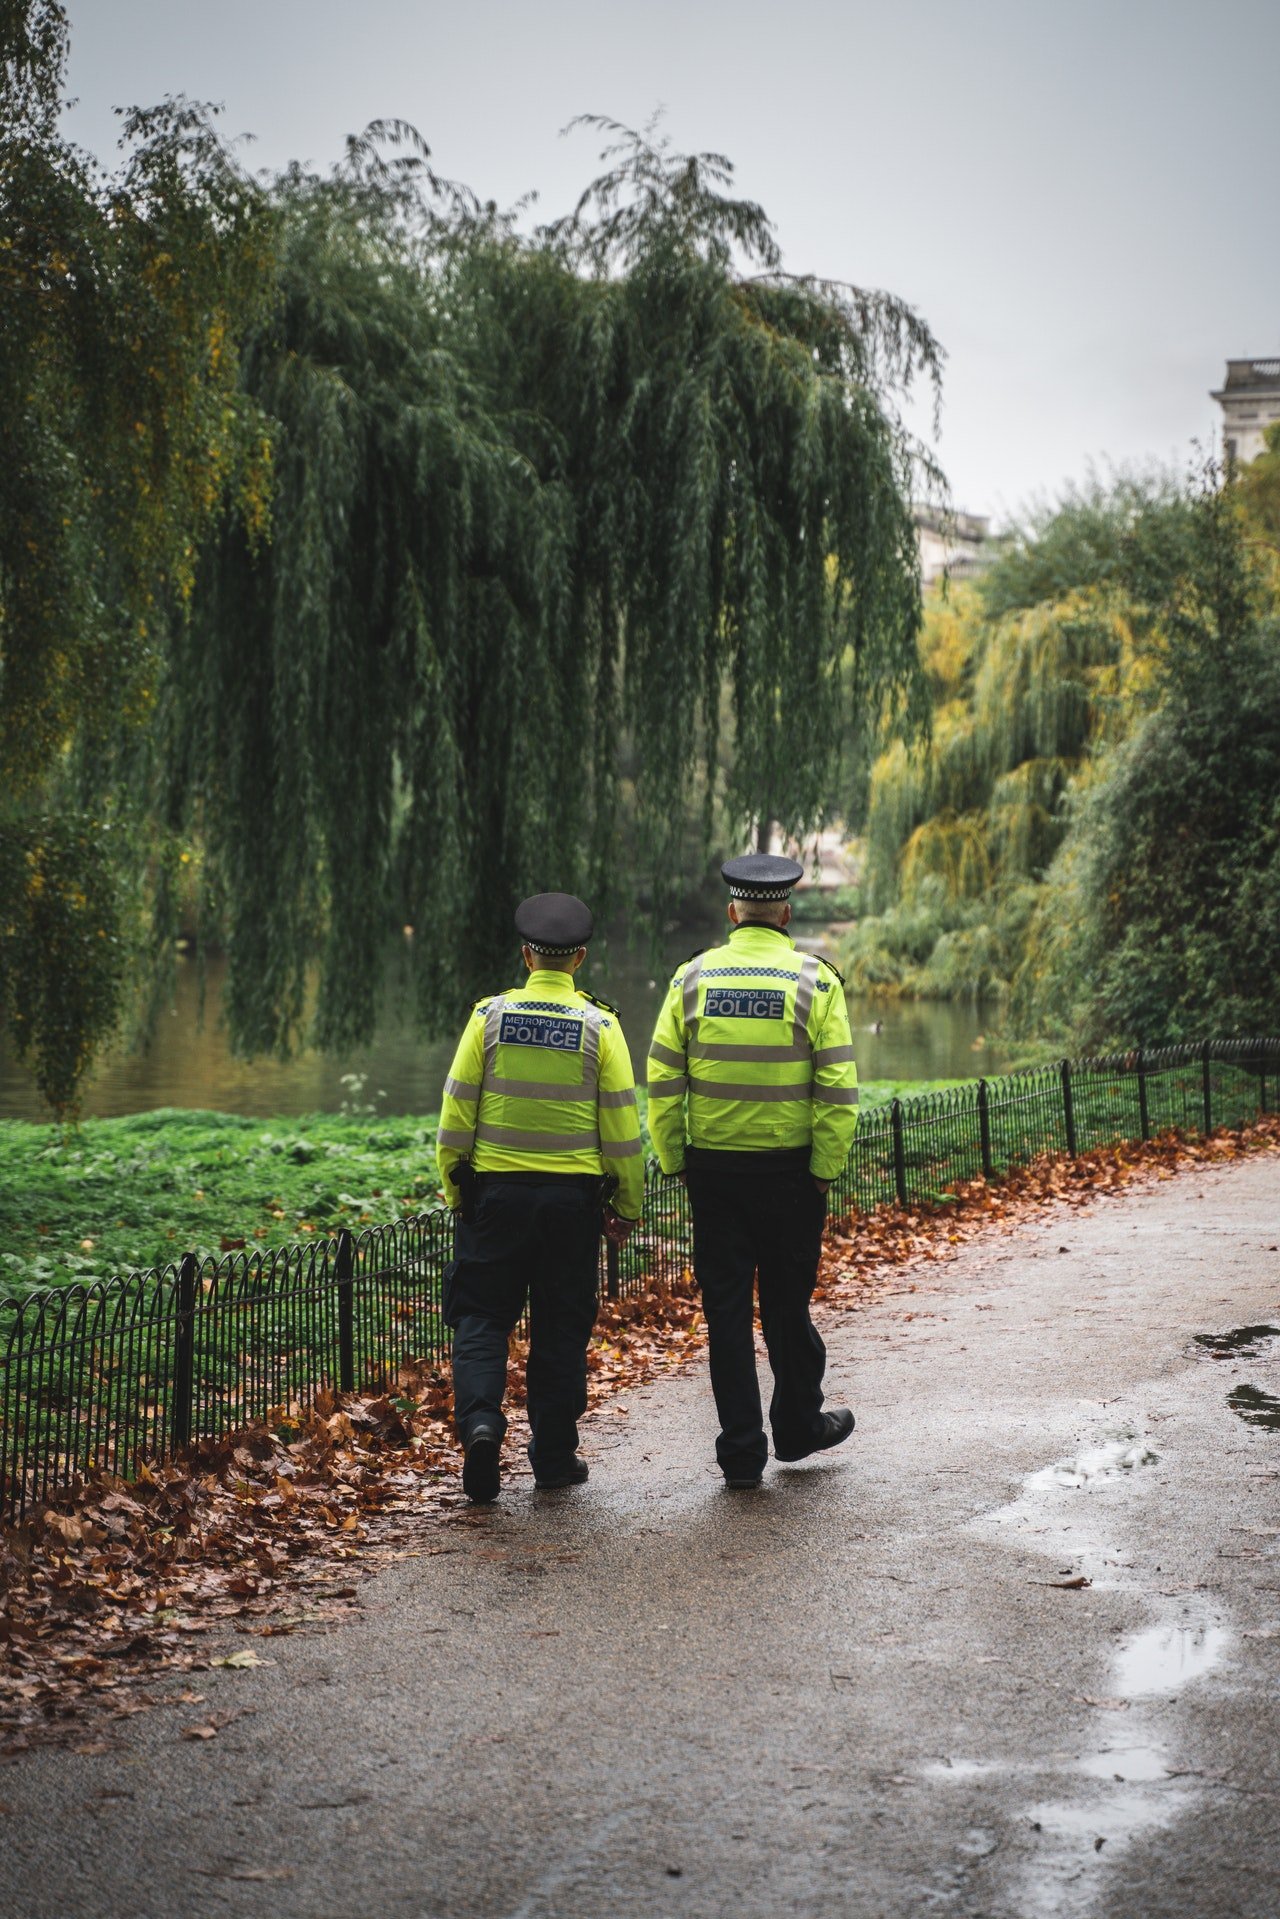 Photo of two police officers walking down the road | Photo: Pexels